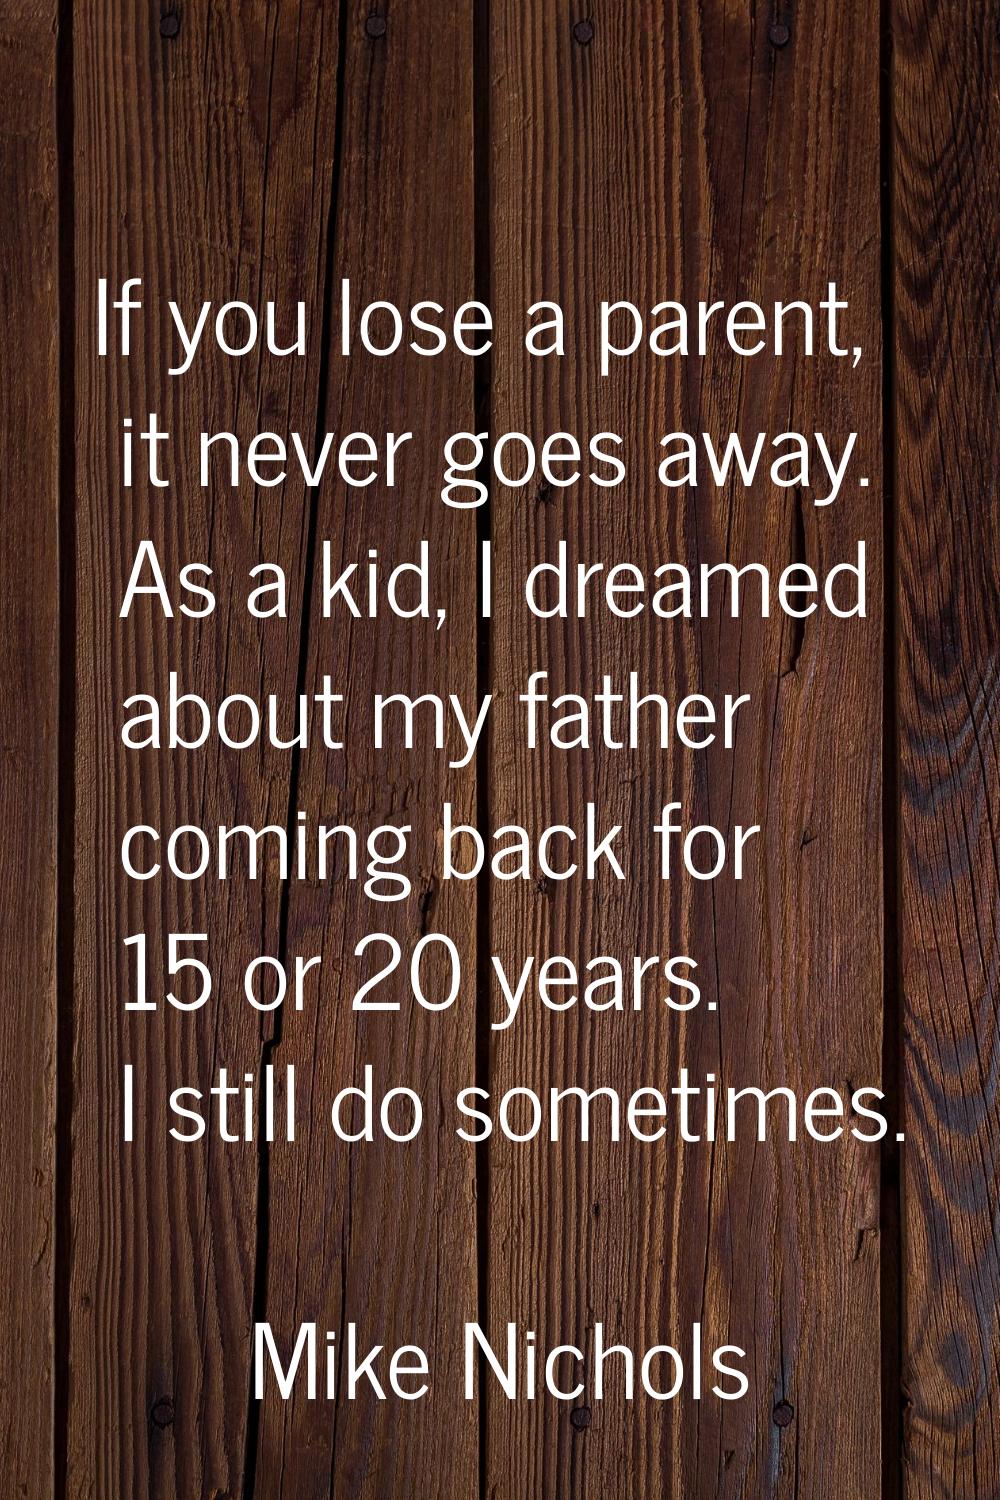 If you lose a parent, it never goes away. As a kid, I dreamed about my father coming back for 15 or